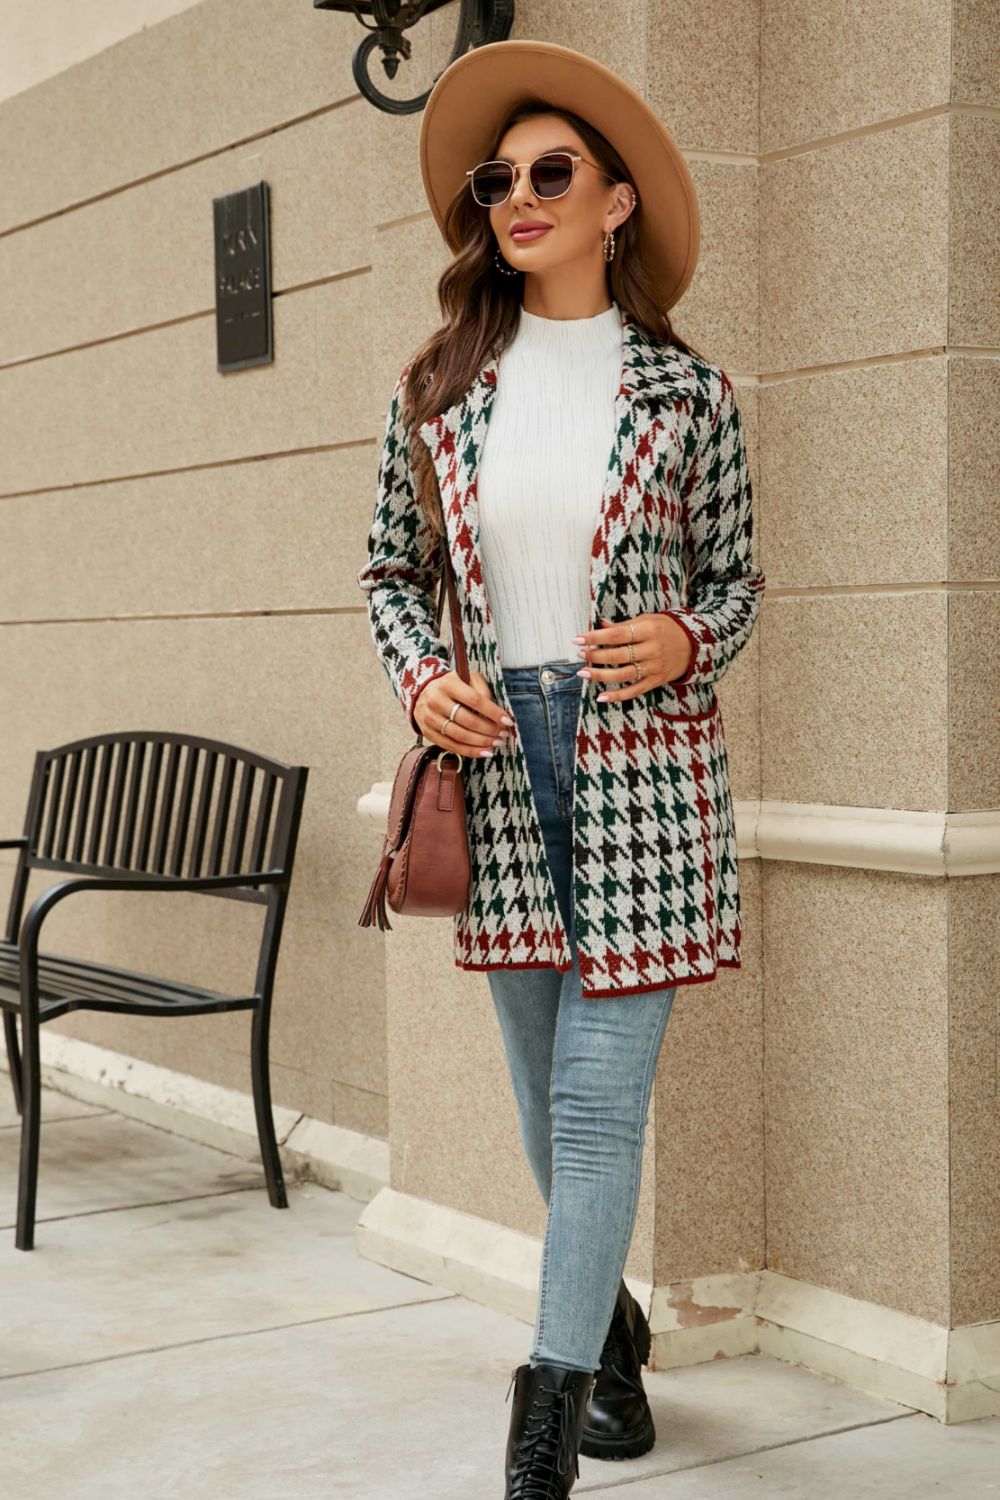 Printed Open Front Lapel Collar Cardigan with Pockets